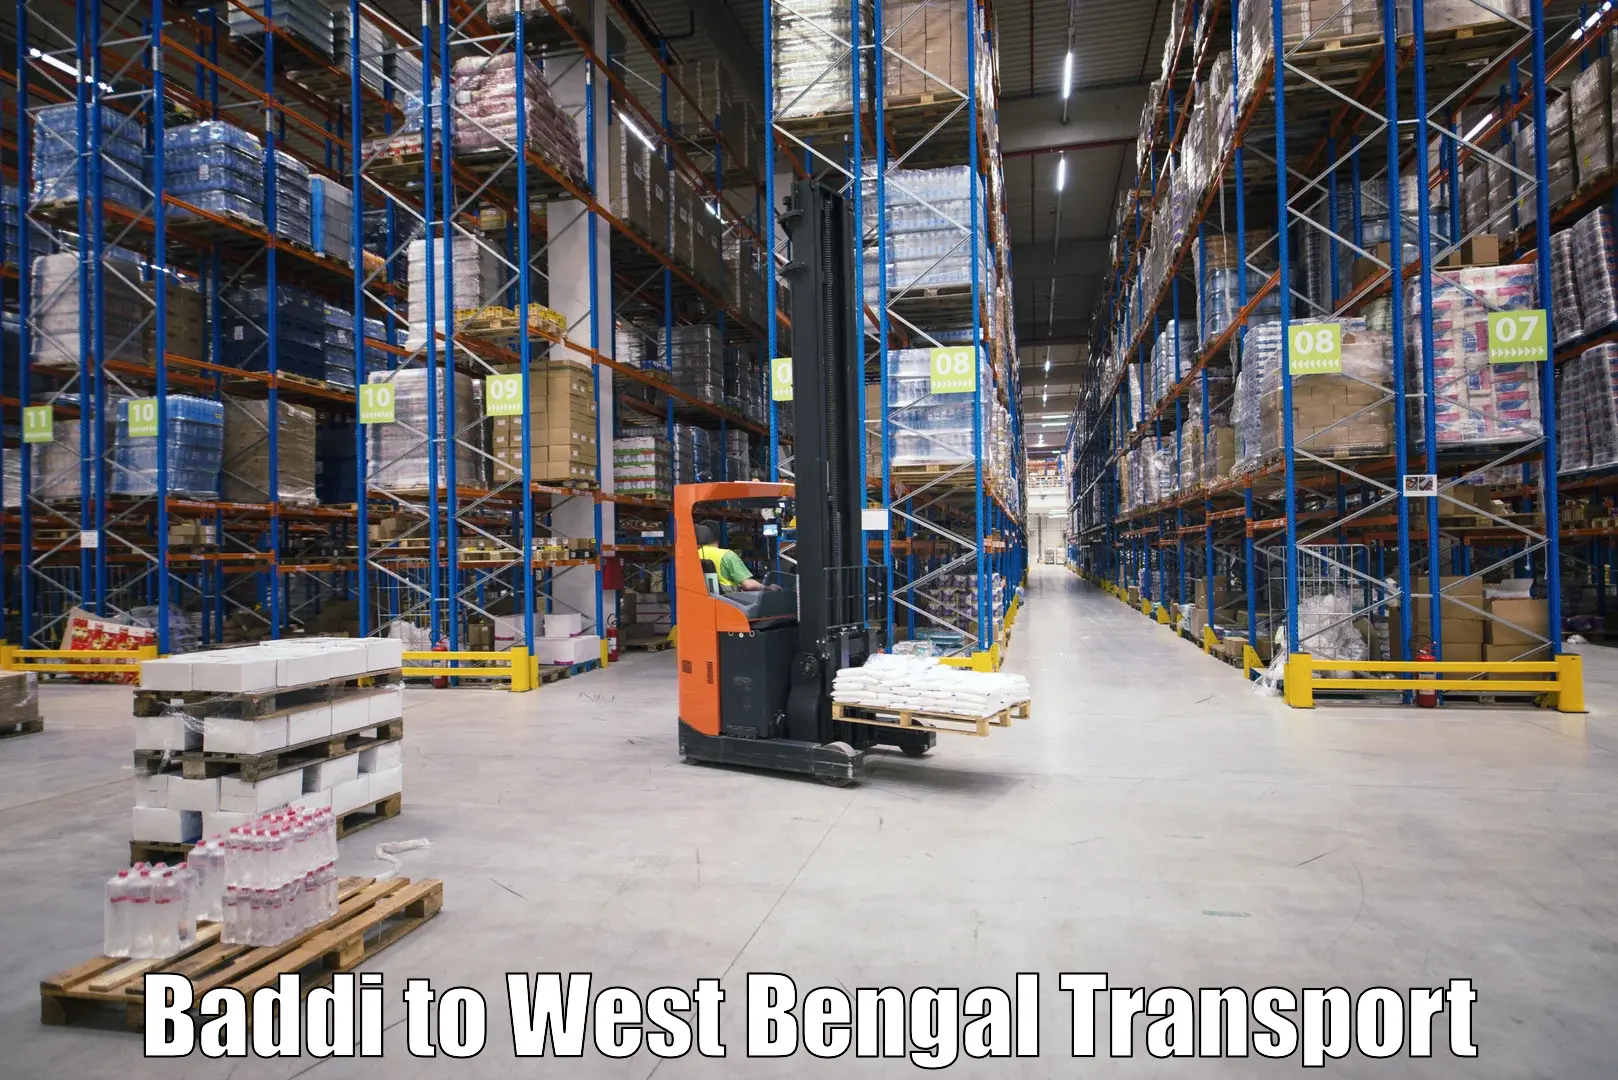 Delivery service Baddi to West Bengal